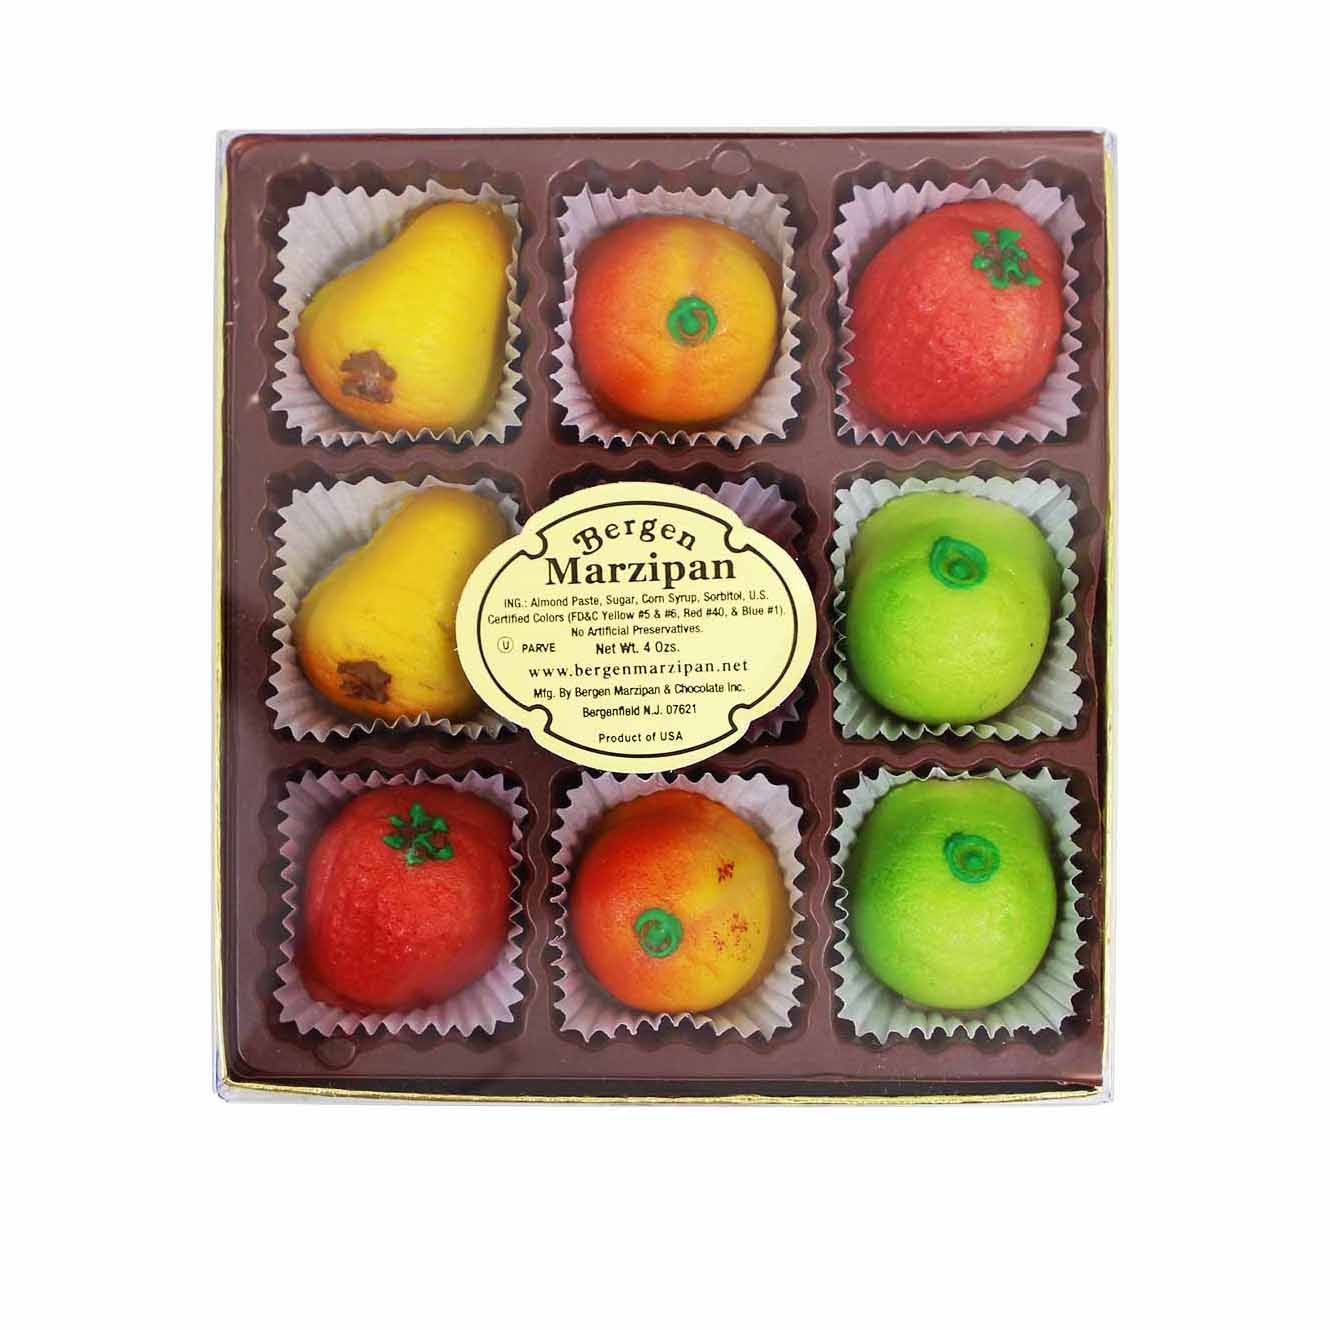 PURE Marzipan Fruit Candy 9 pc Gift Box